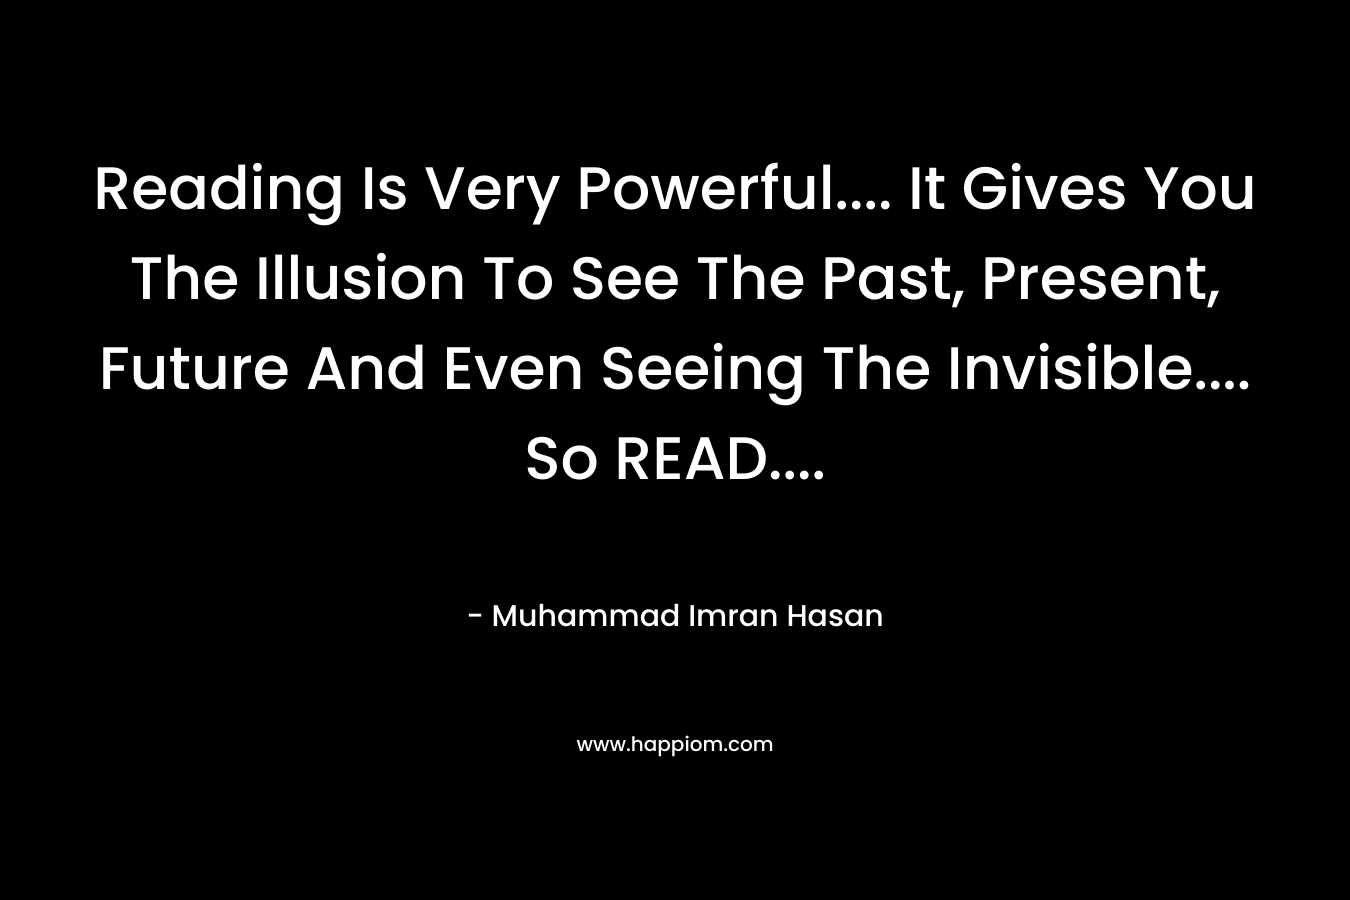 Reading Is Very Powerful.... It Gives You The Illusion To See The Past, Present, Future And Even Seeing The Invisible.... So READ....